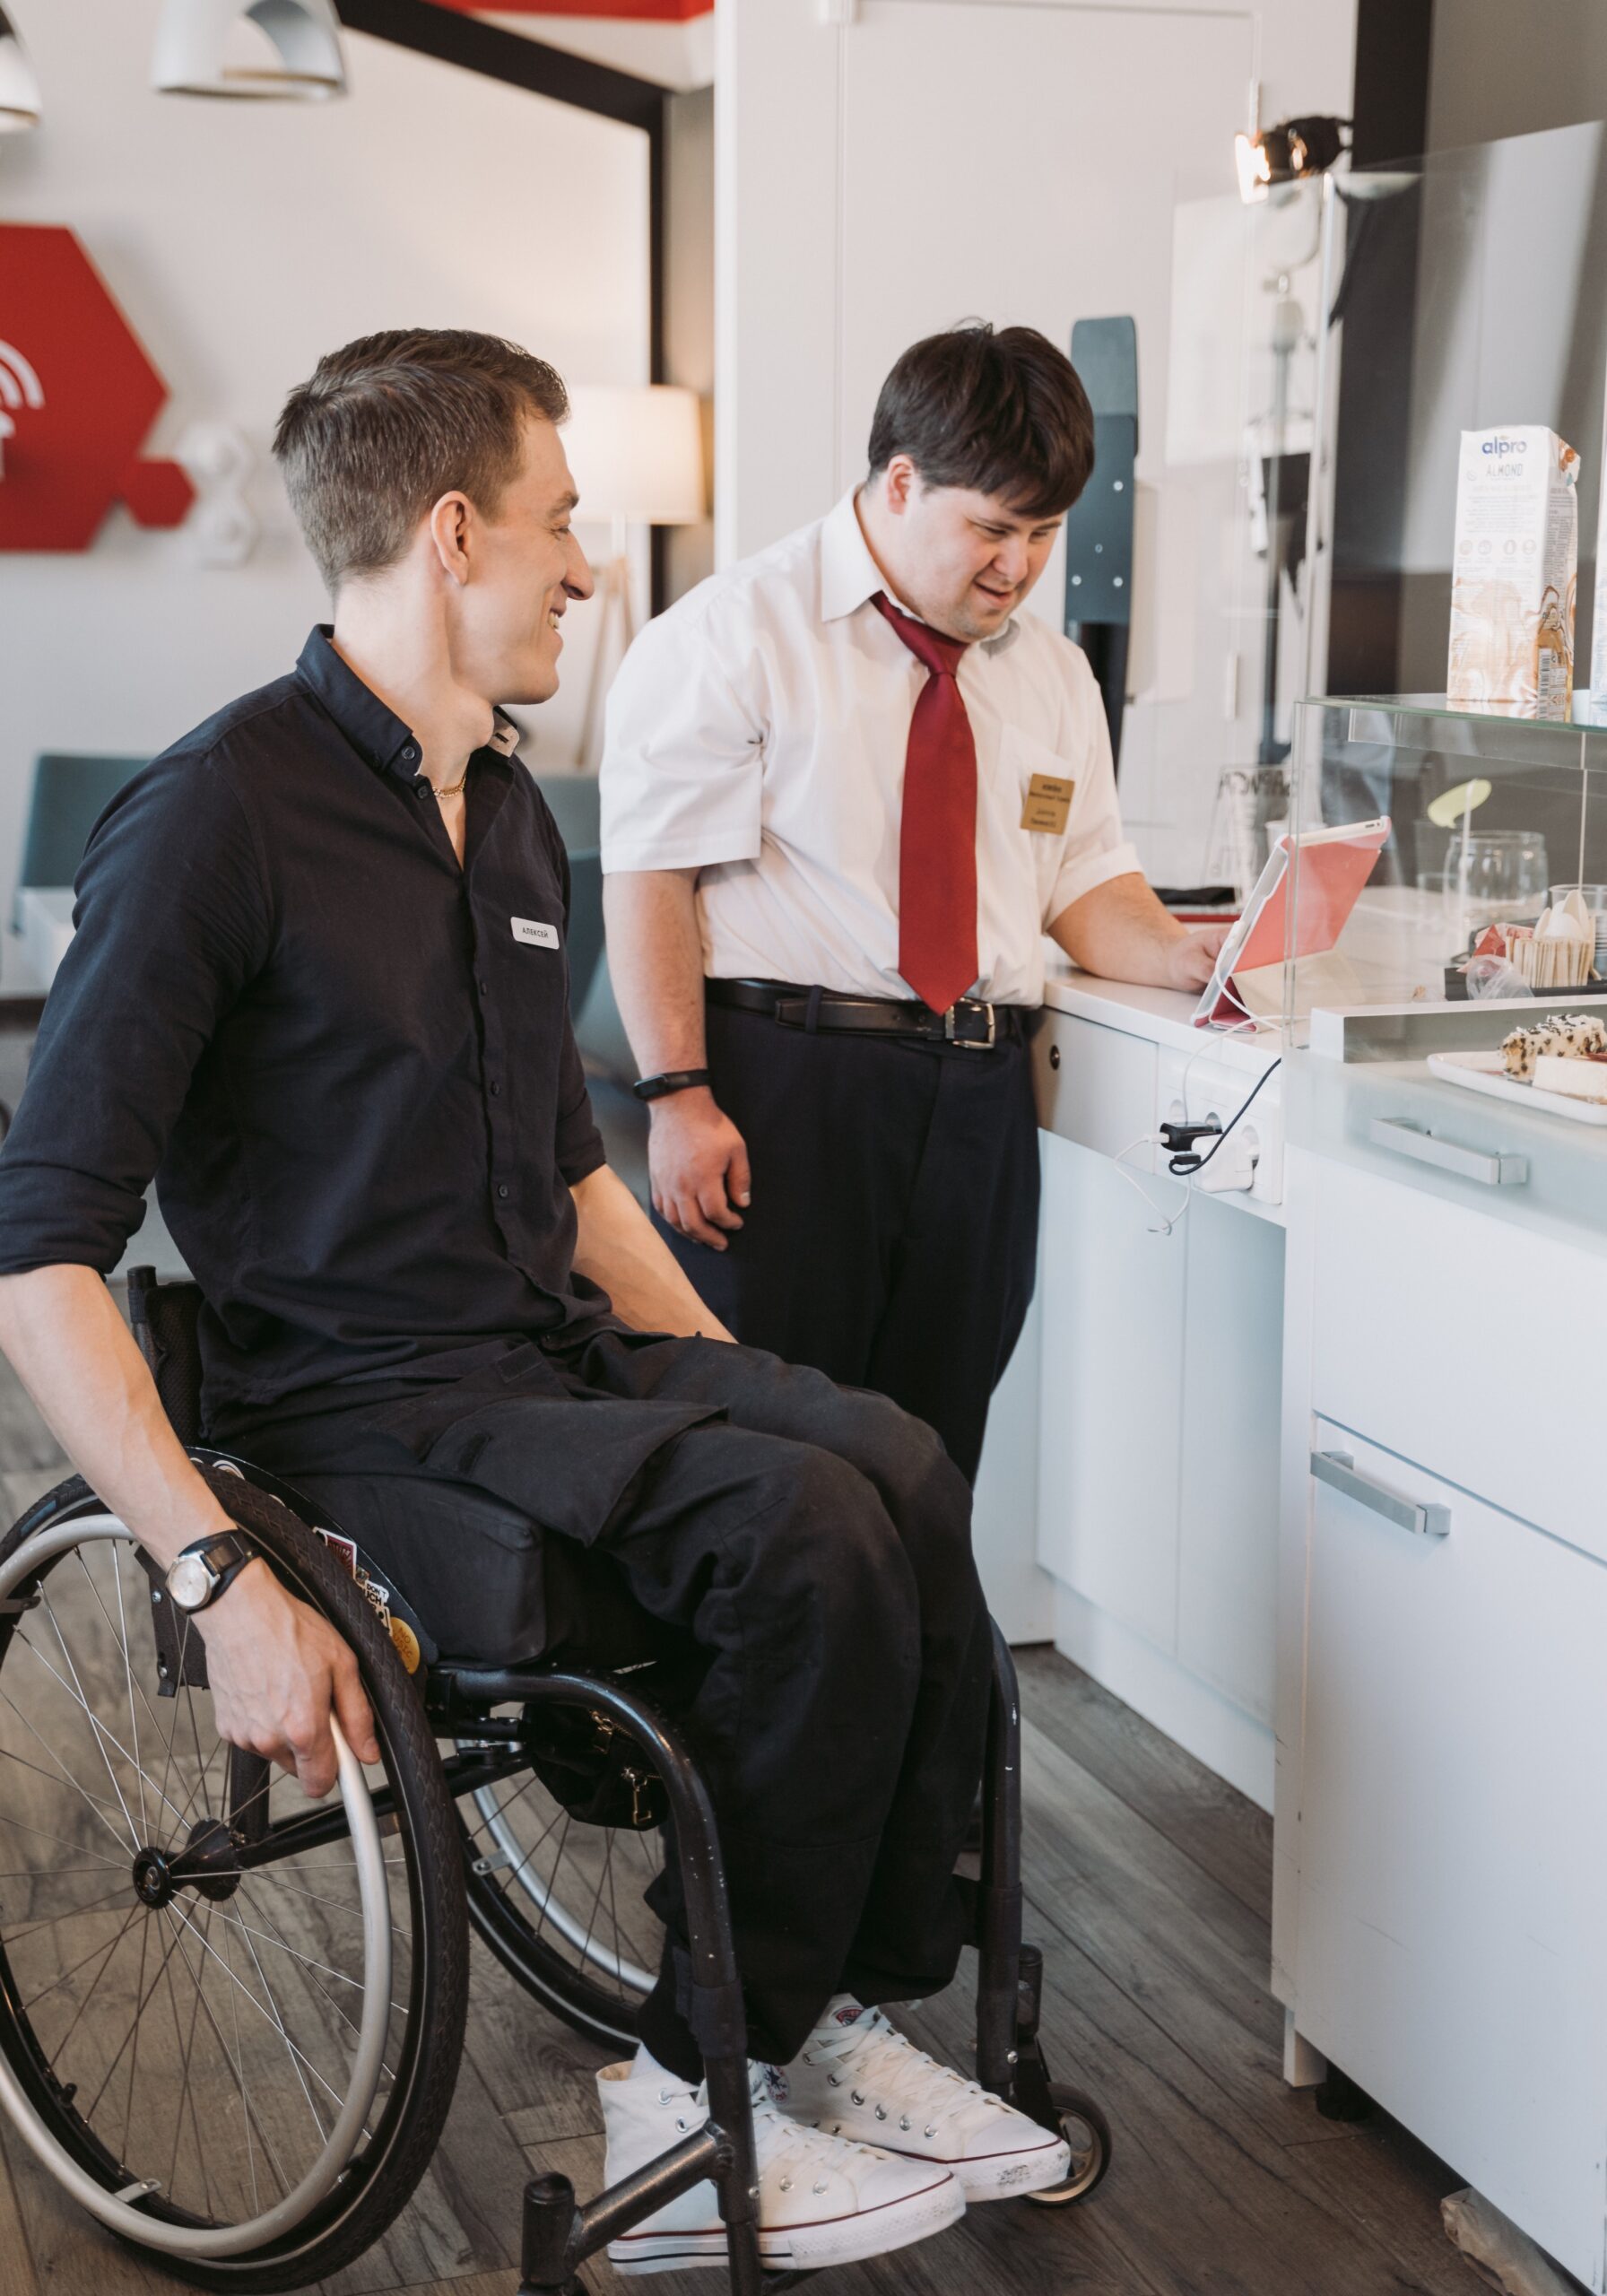 Vocational Evaluations and Disability Management